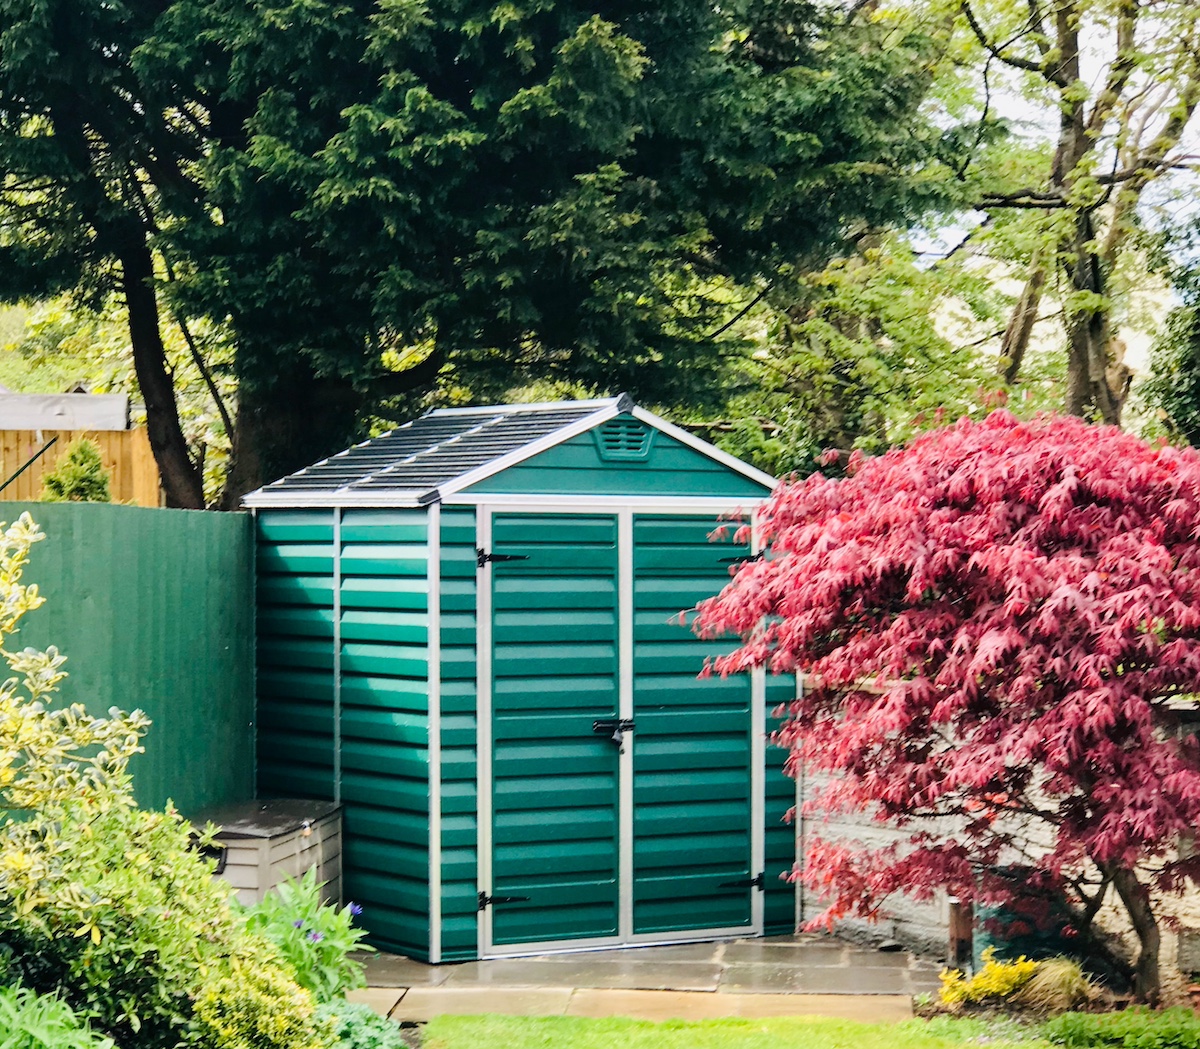 8. Make sure your shed or garage is well-ventilated